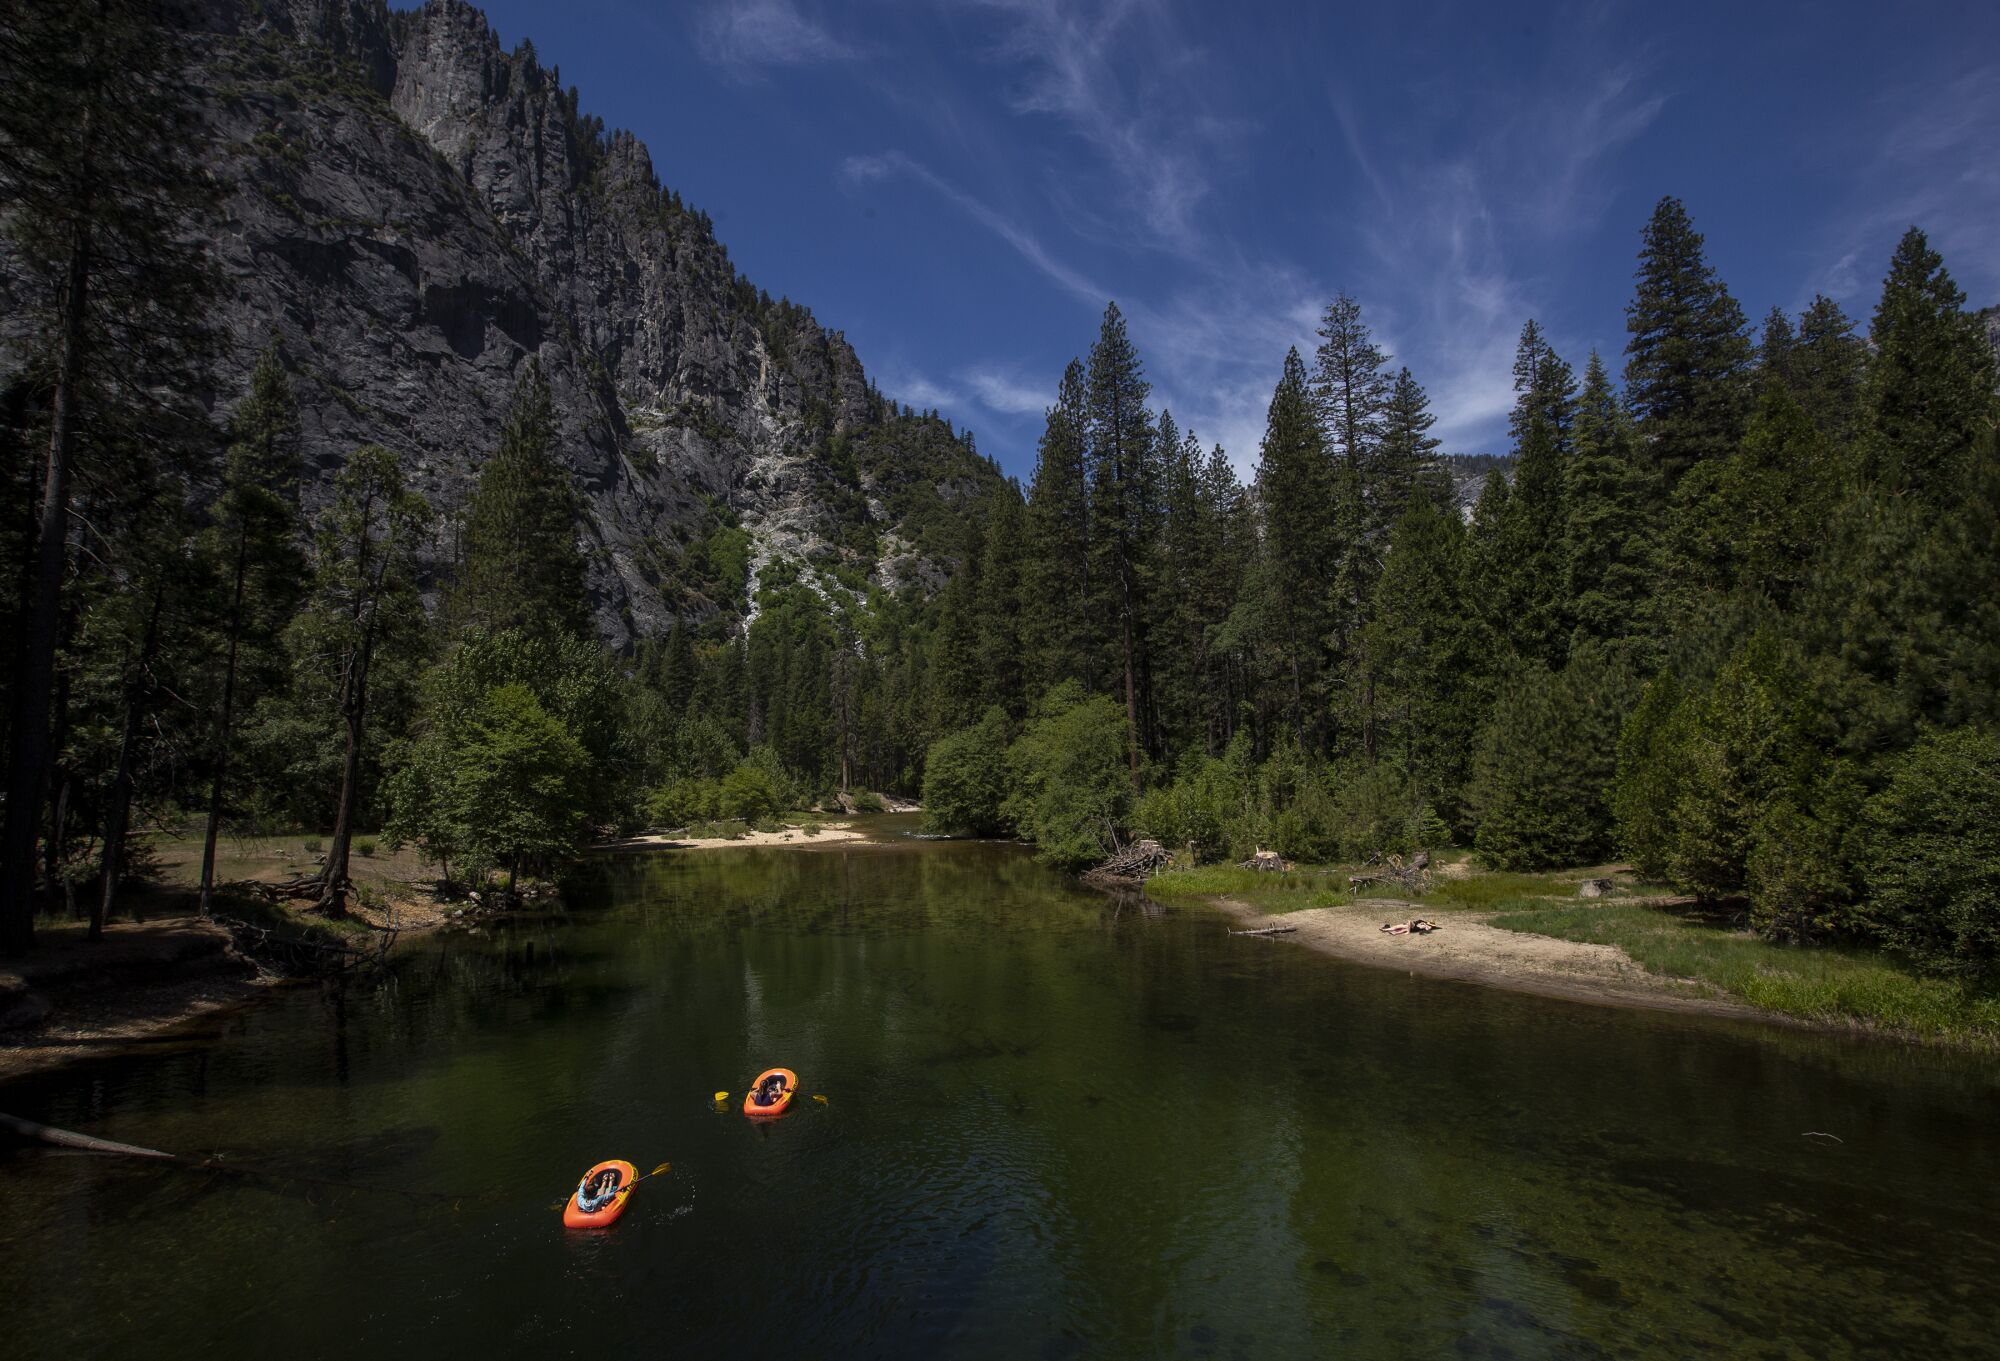 Rafters paddle down the Merced River in Yosemite Valley.